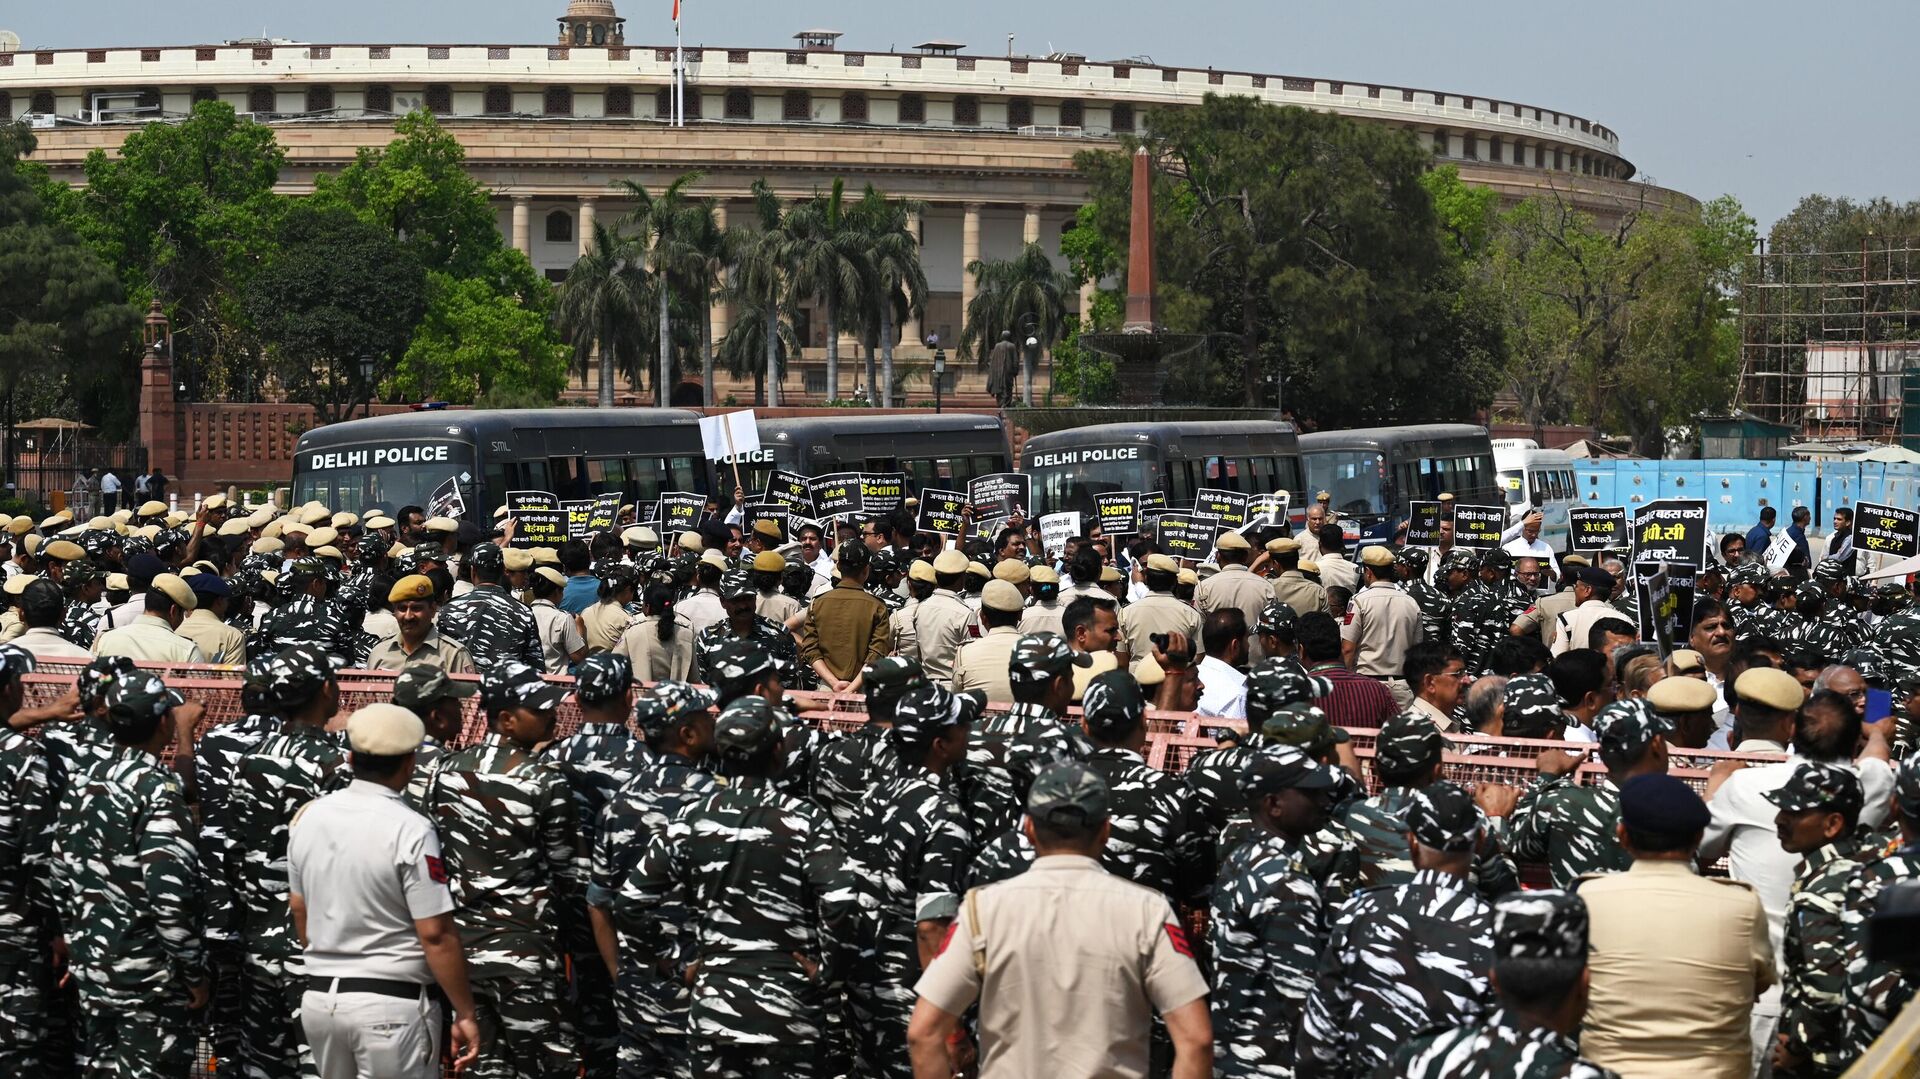 Security personnel stand guard as members of India's opposition parties take part in a protest near the parliament in New Delhi on March 15, 2023, calling for an enquiry into allegations of major accounting fraud at Adani, the country's biggest conglomerate. - Sputnik India, 1920, 16.03.2023